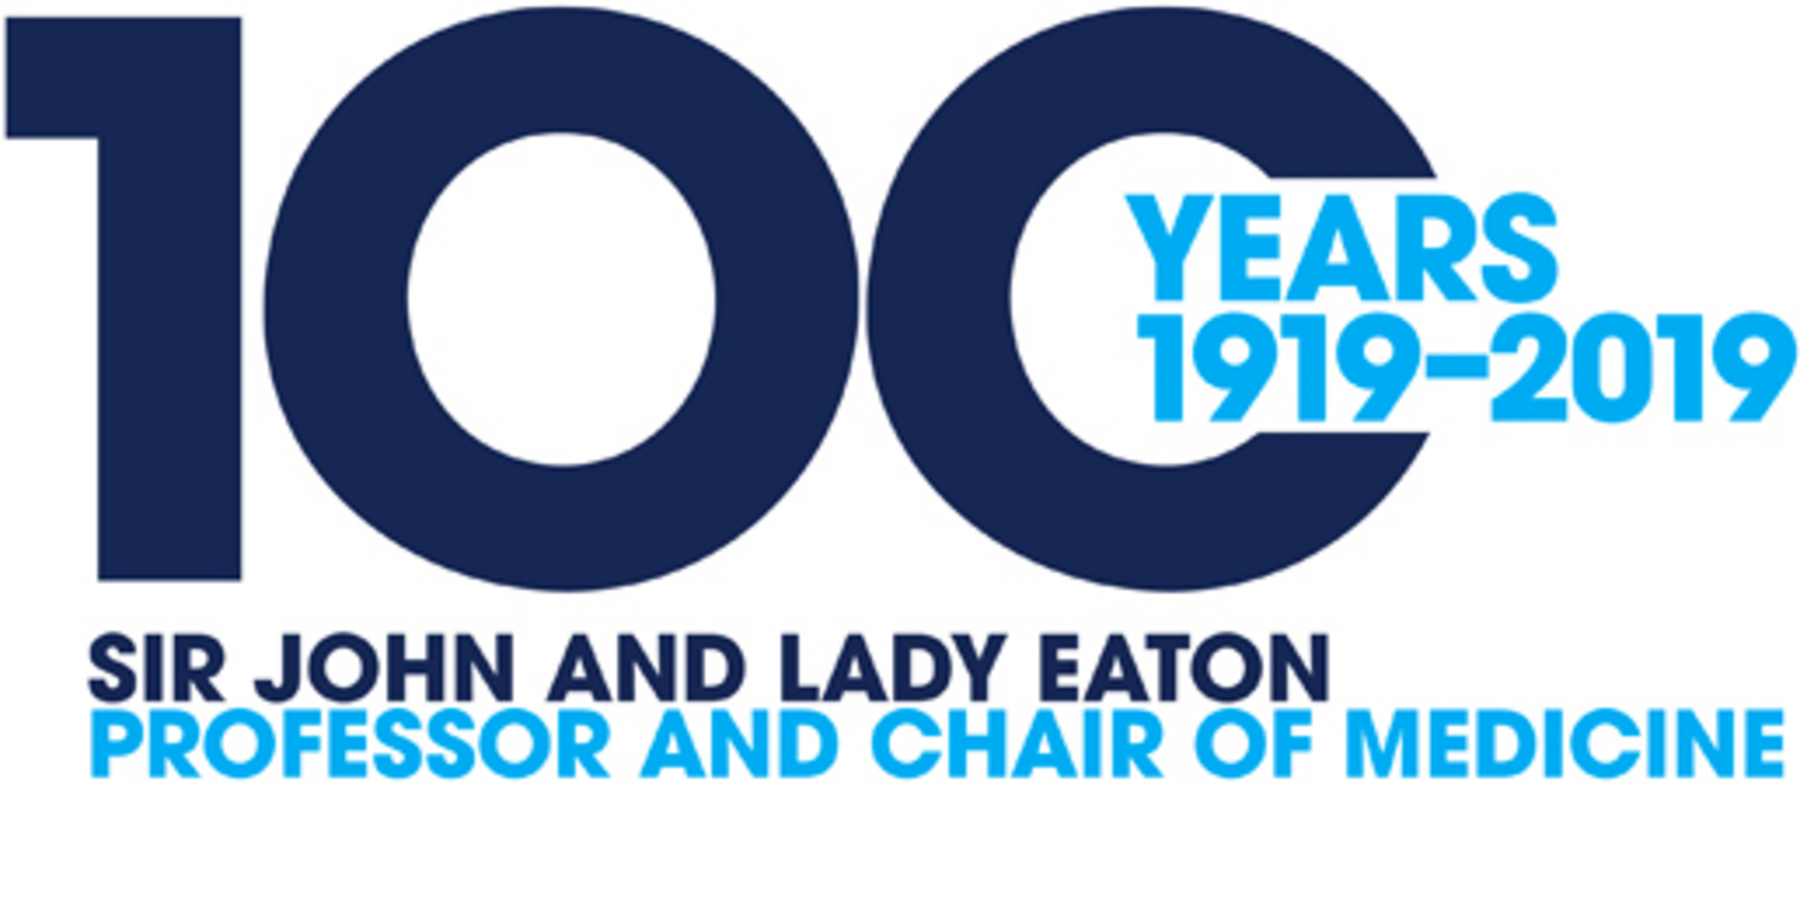 100 Years Sir John and Lady Eaton Professor and Chair of Medicine